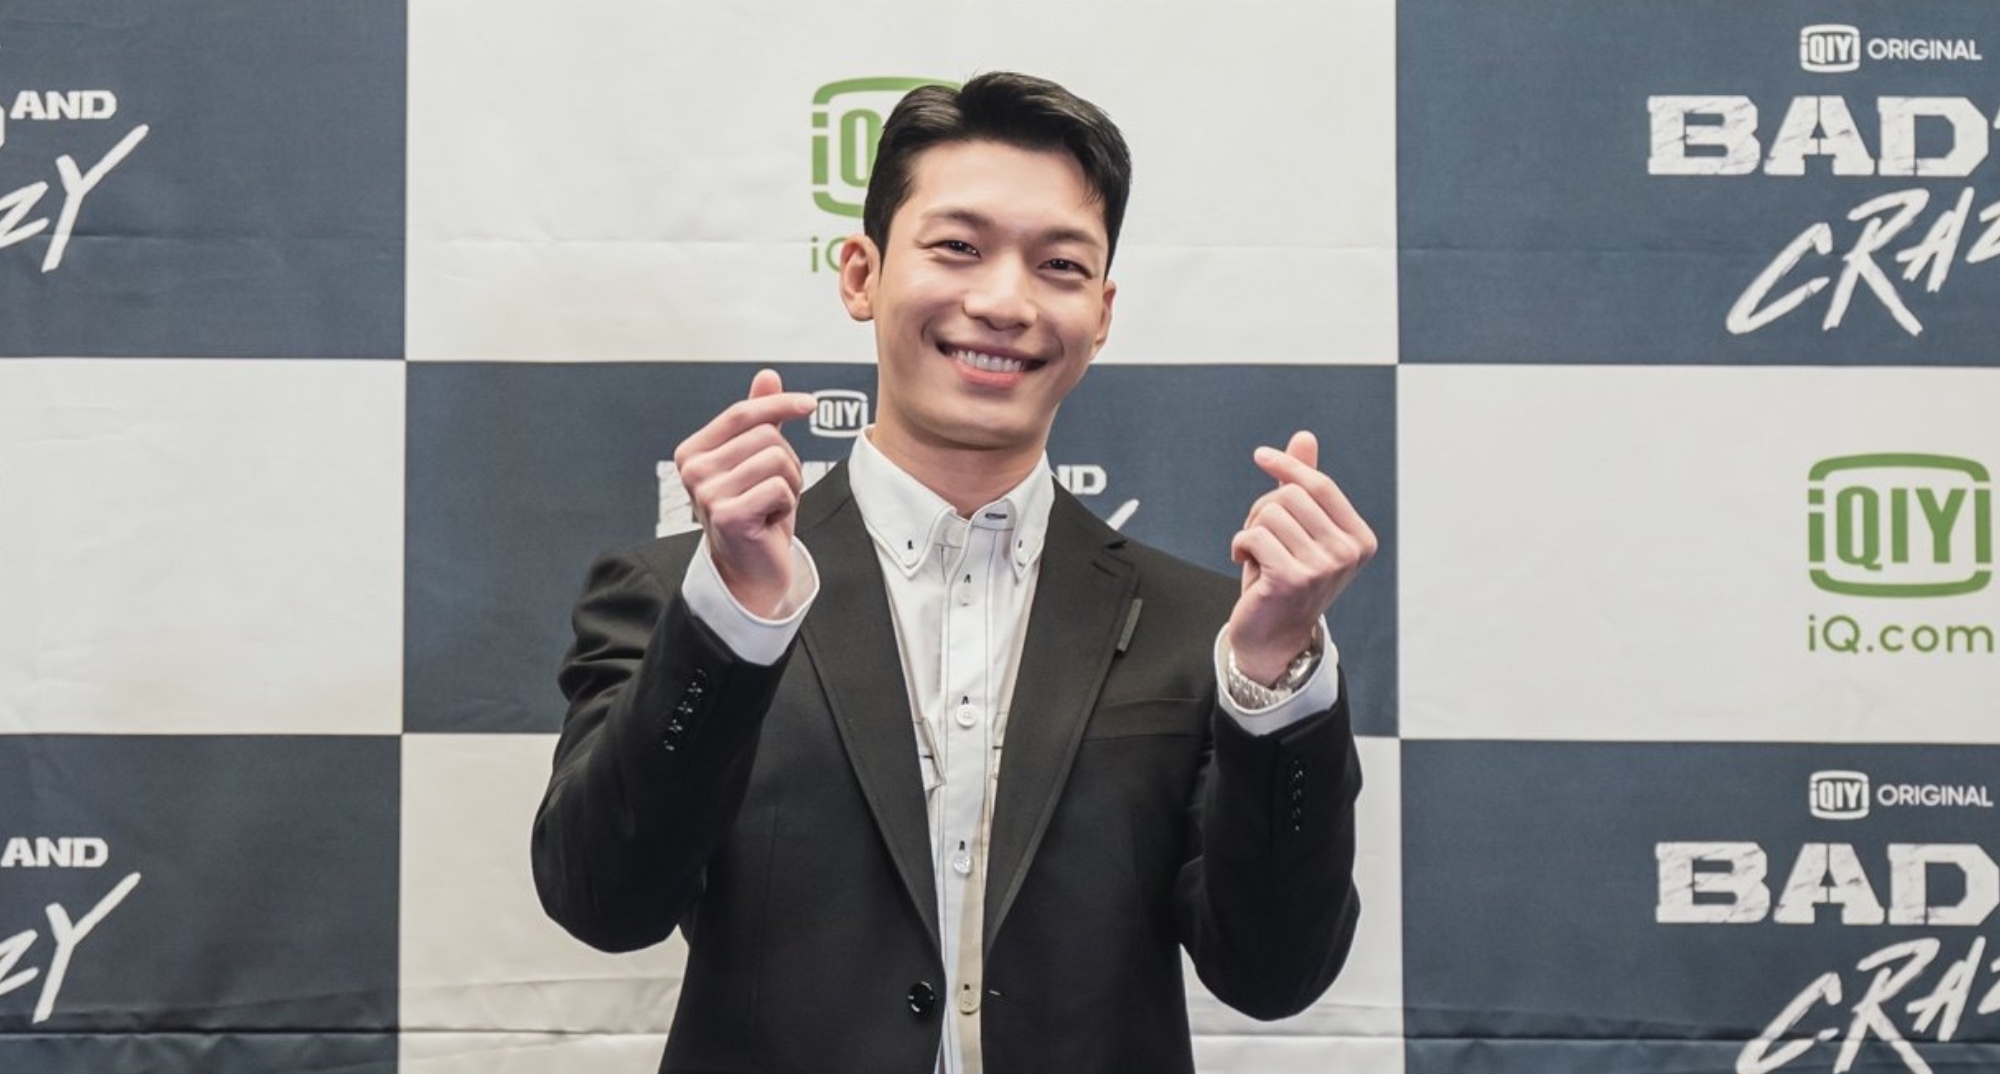 'Squid Game' Wi Ha-joon at press for 'Bad and Crazy' doing heart fingers